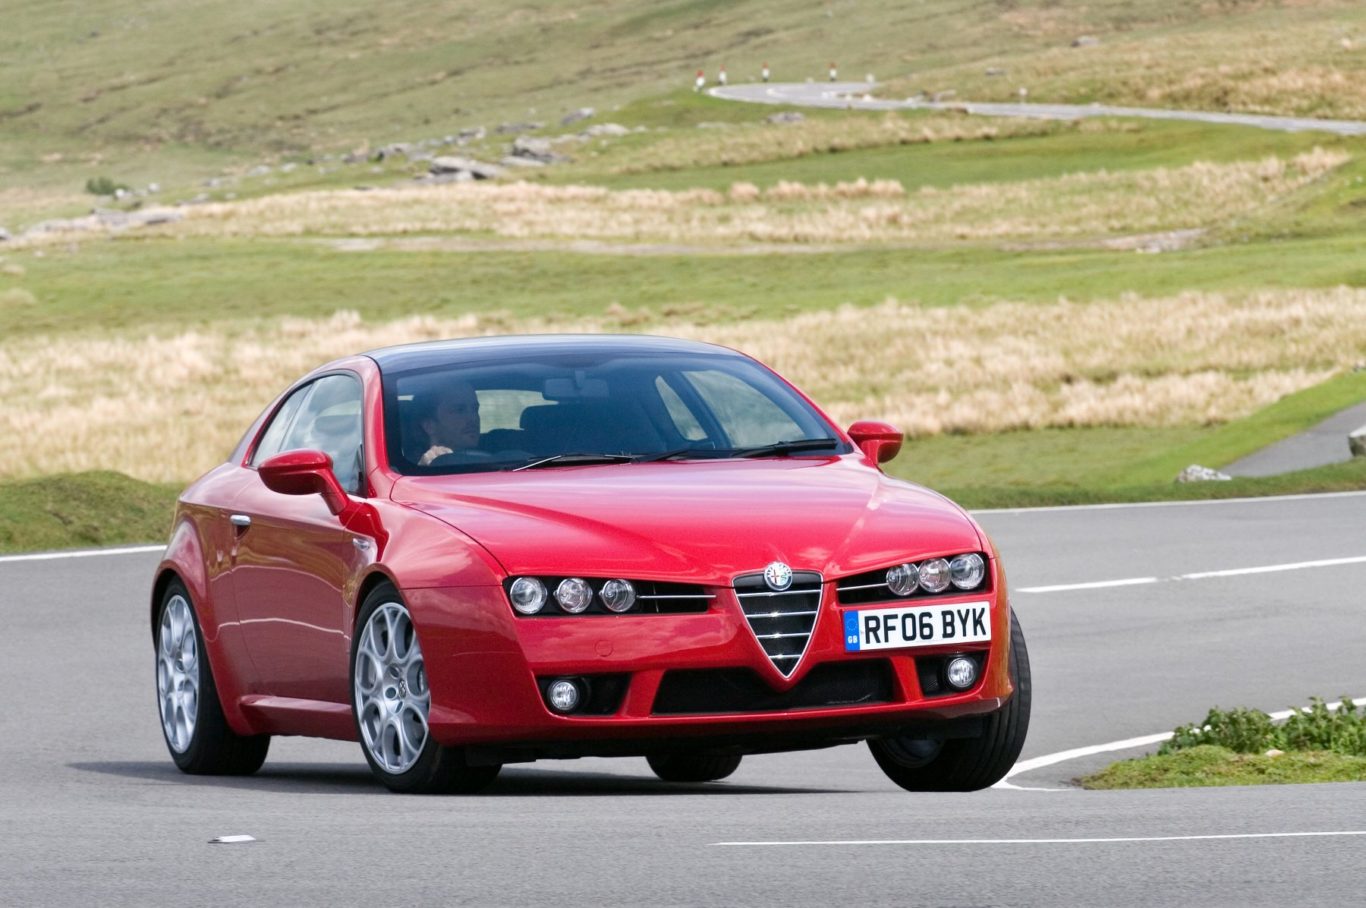 The Brera was famed for its elegant styling